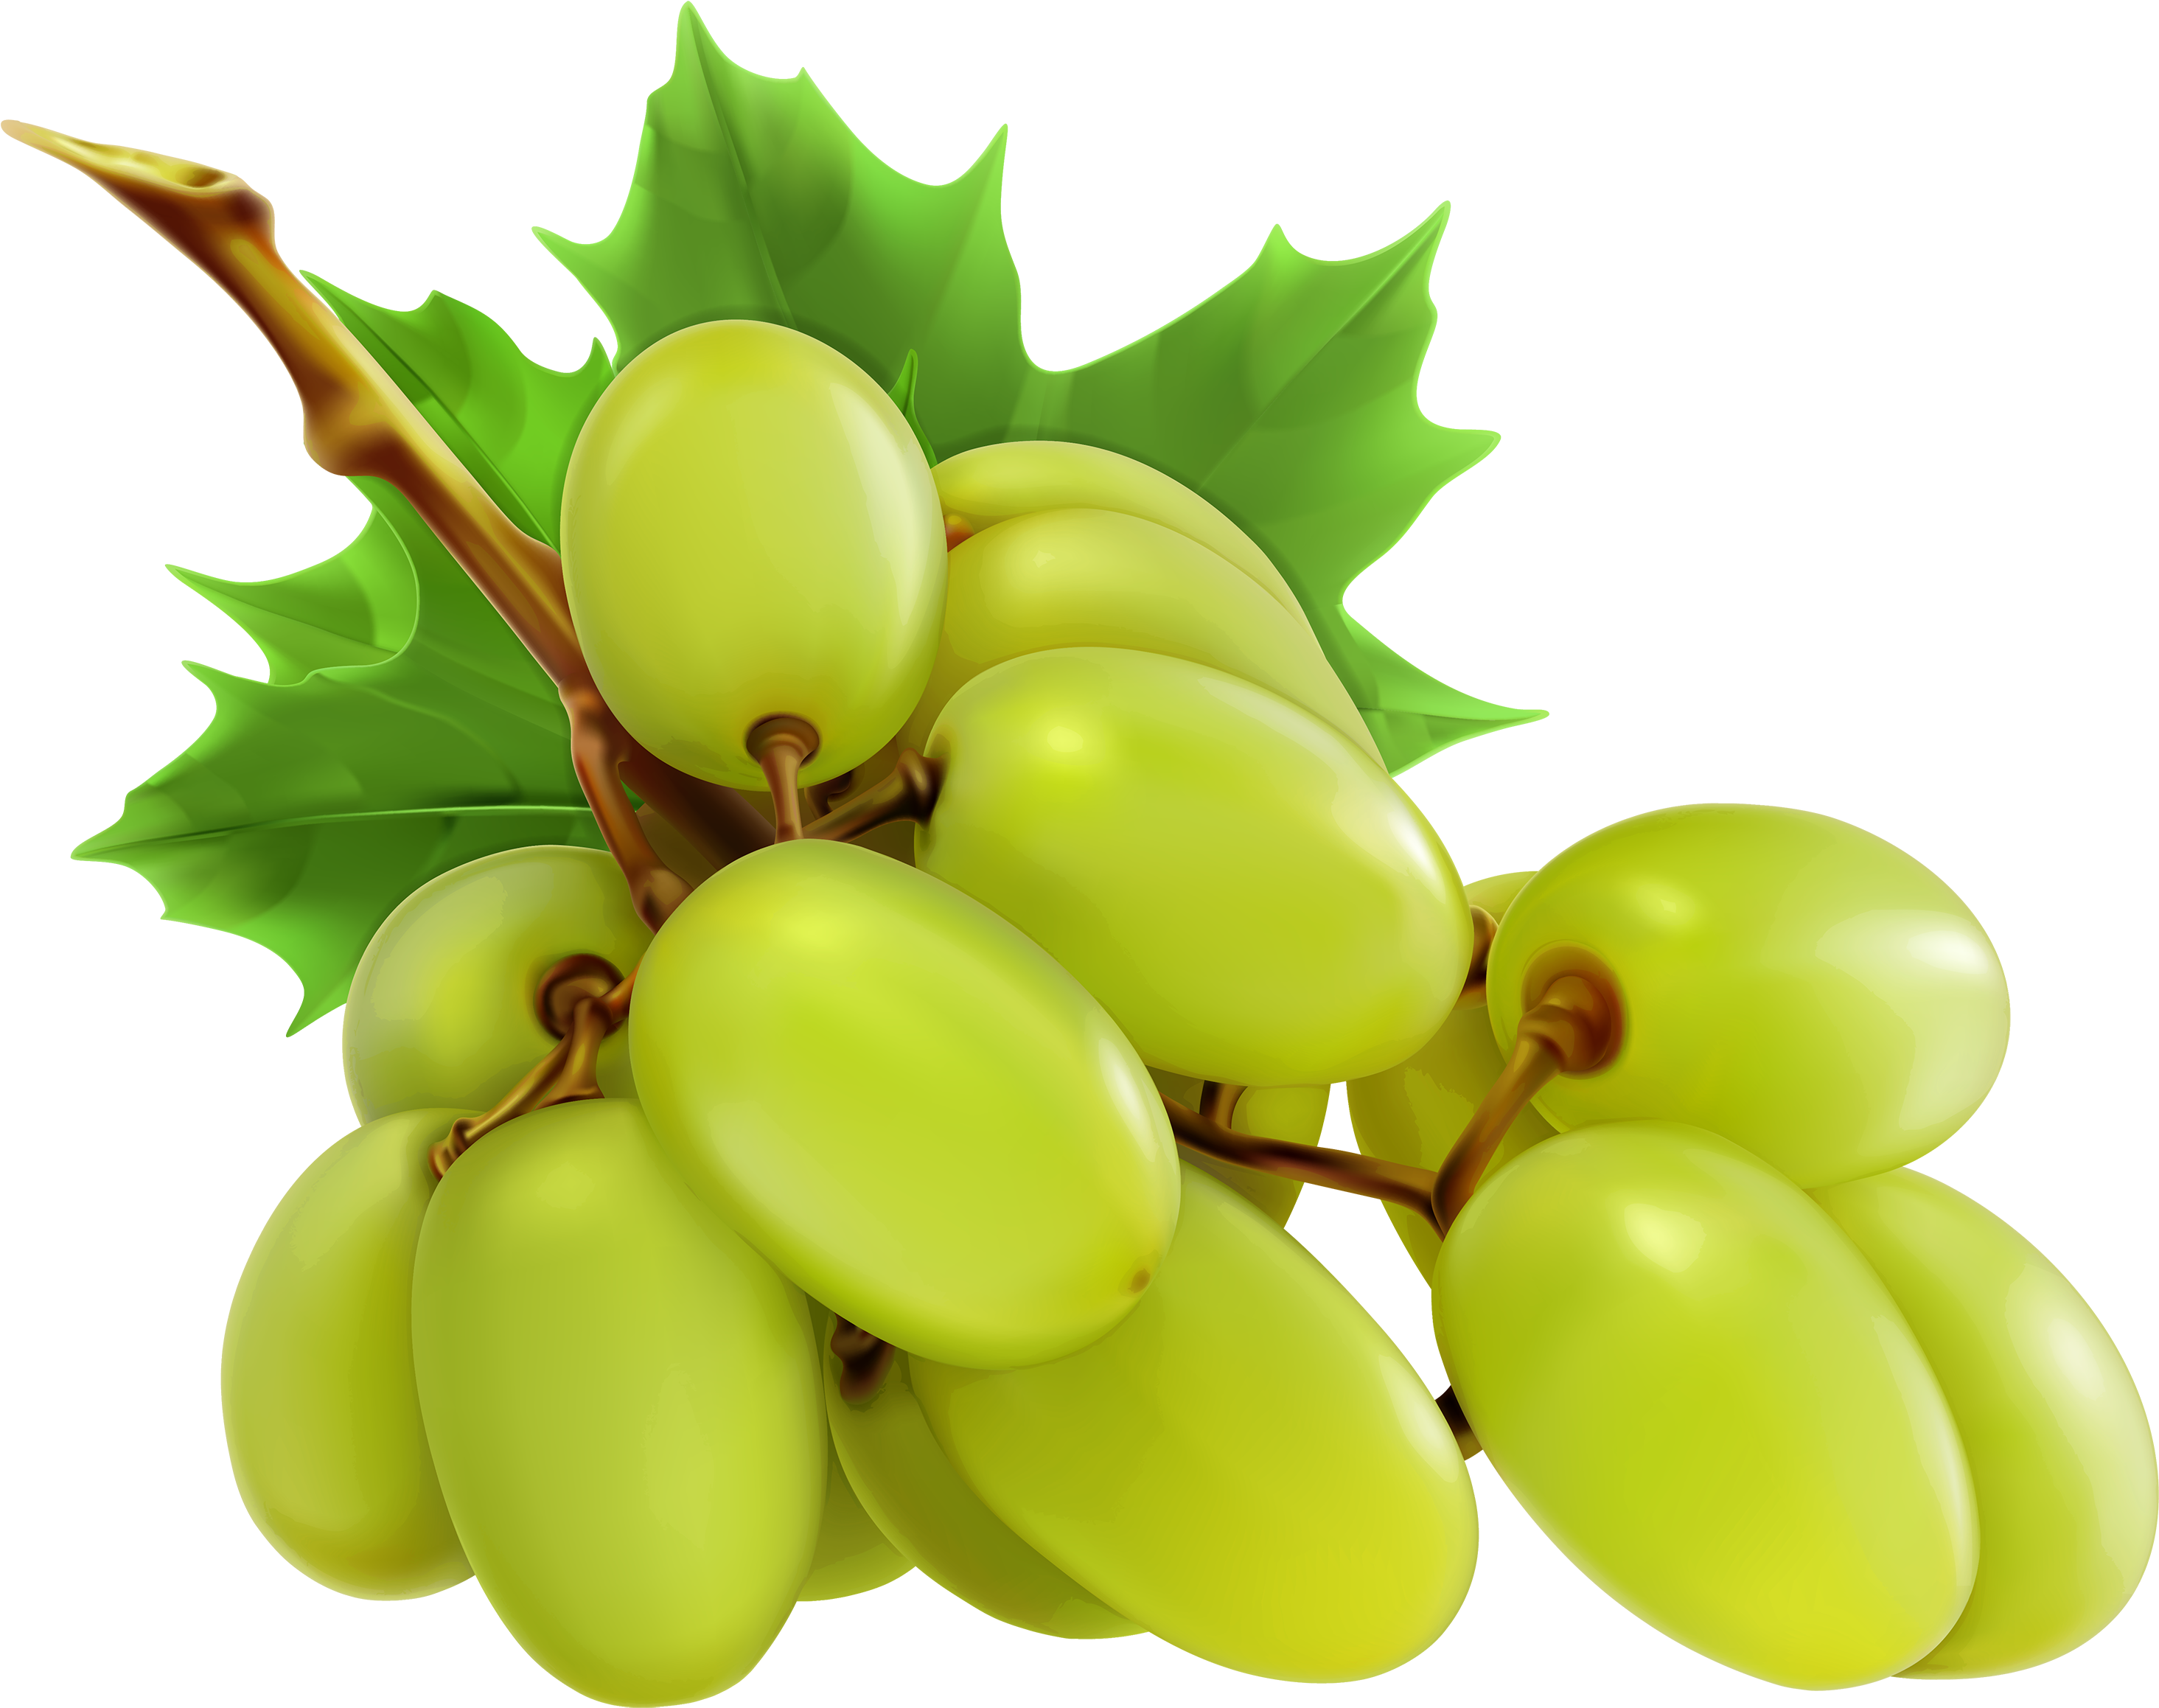 Grapes clipart red.